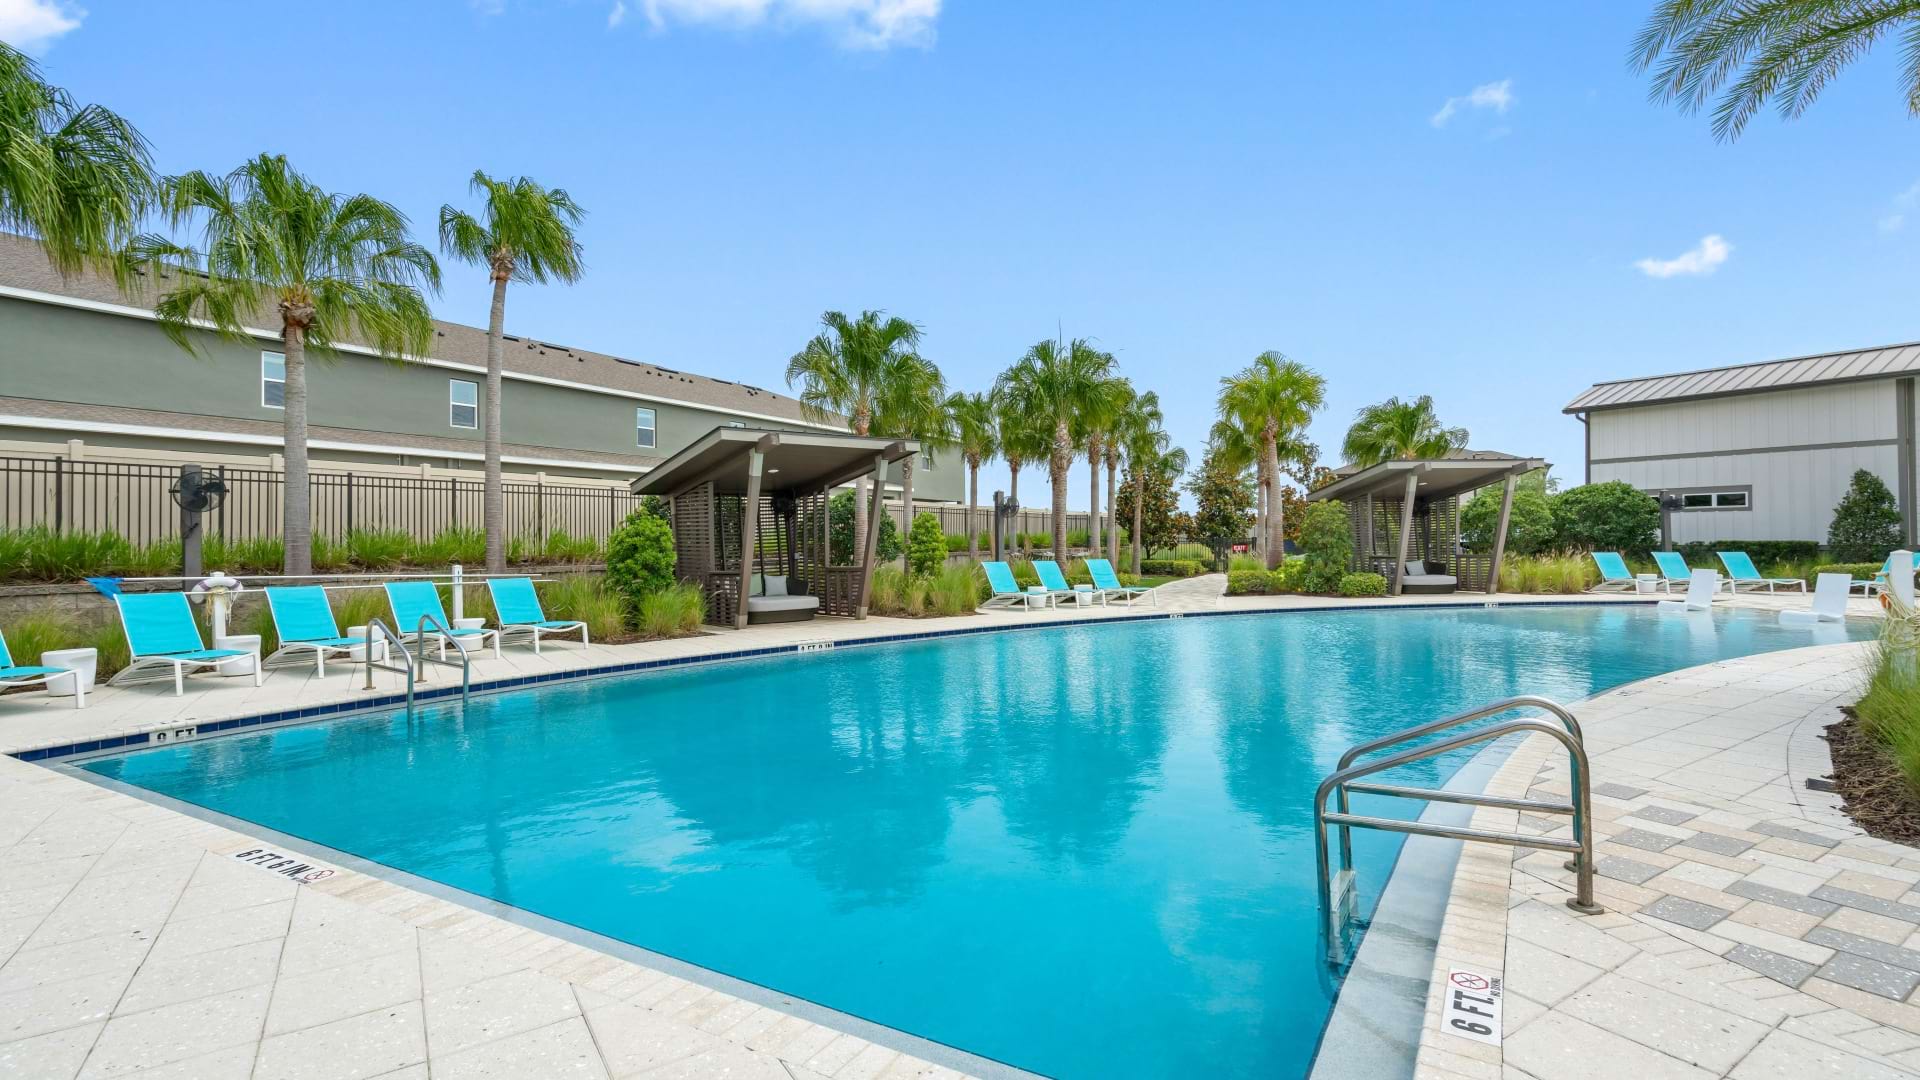 Resort style pool at apartments in Orlando